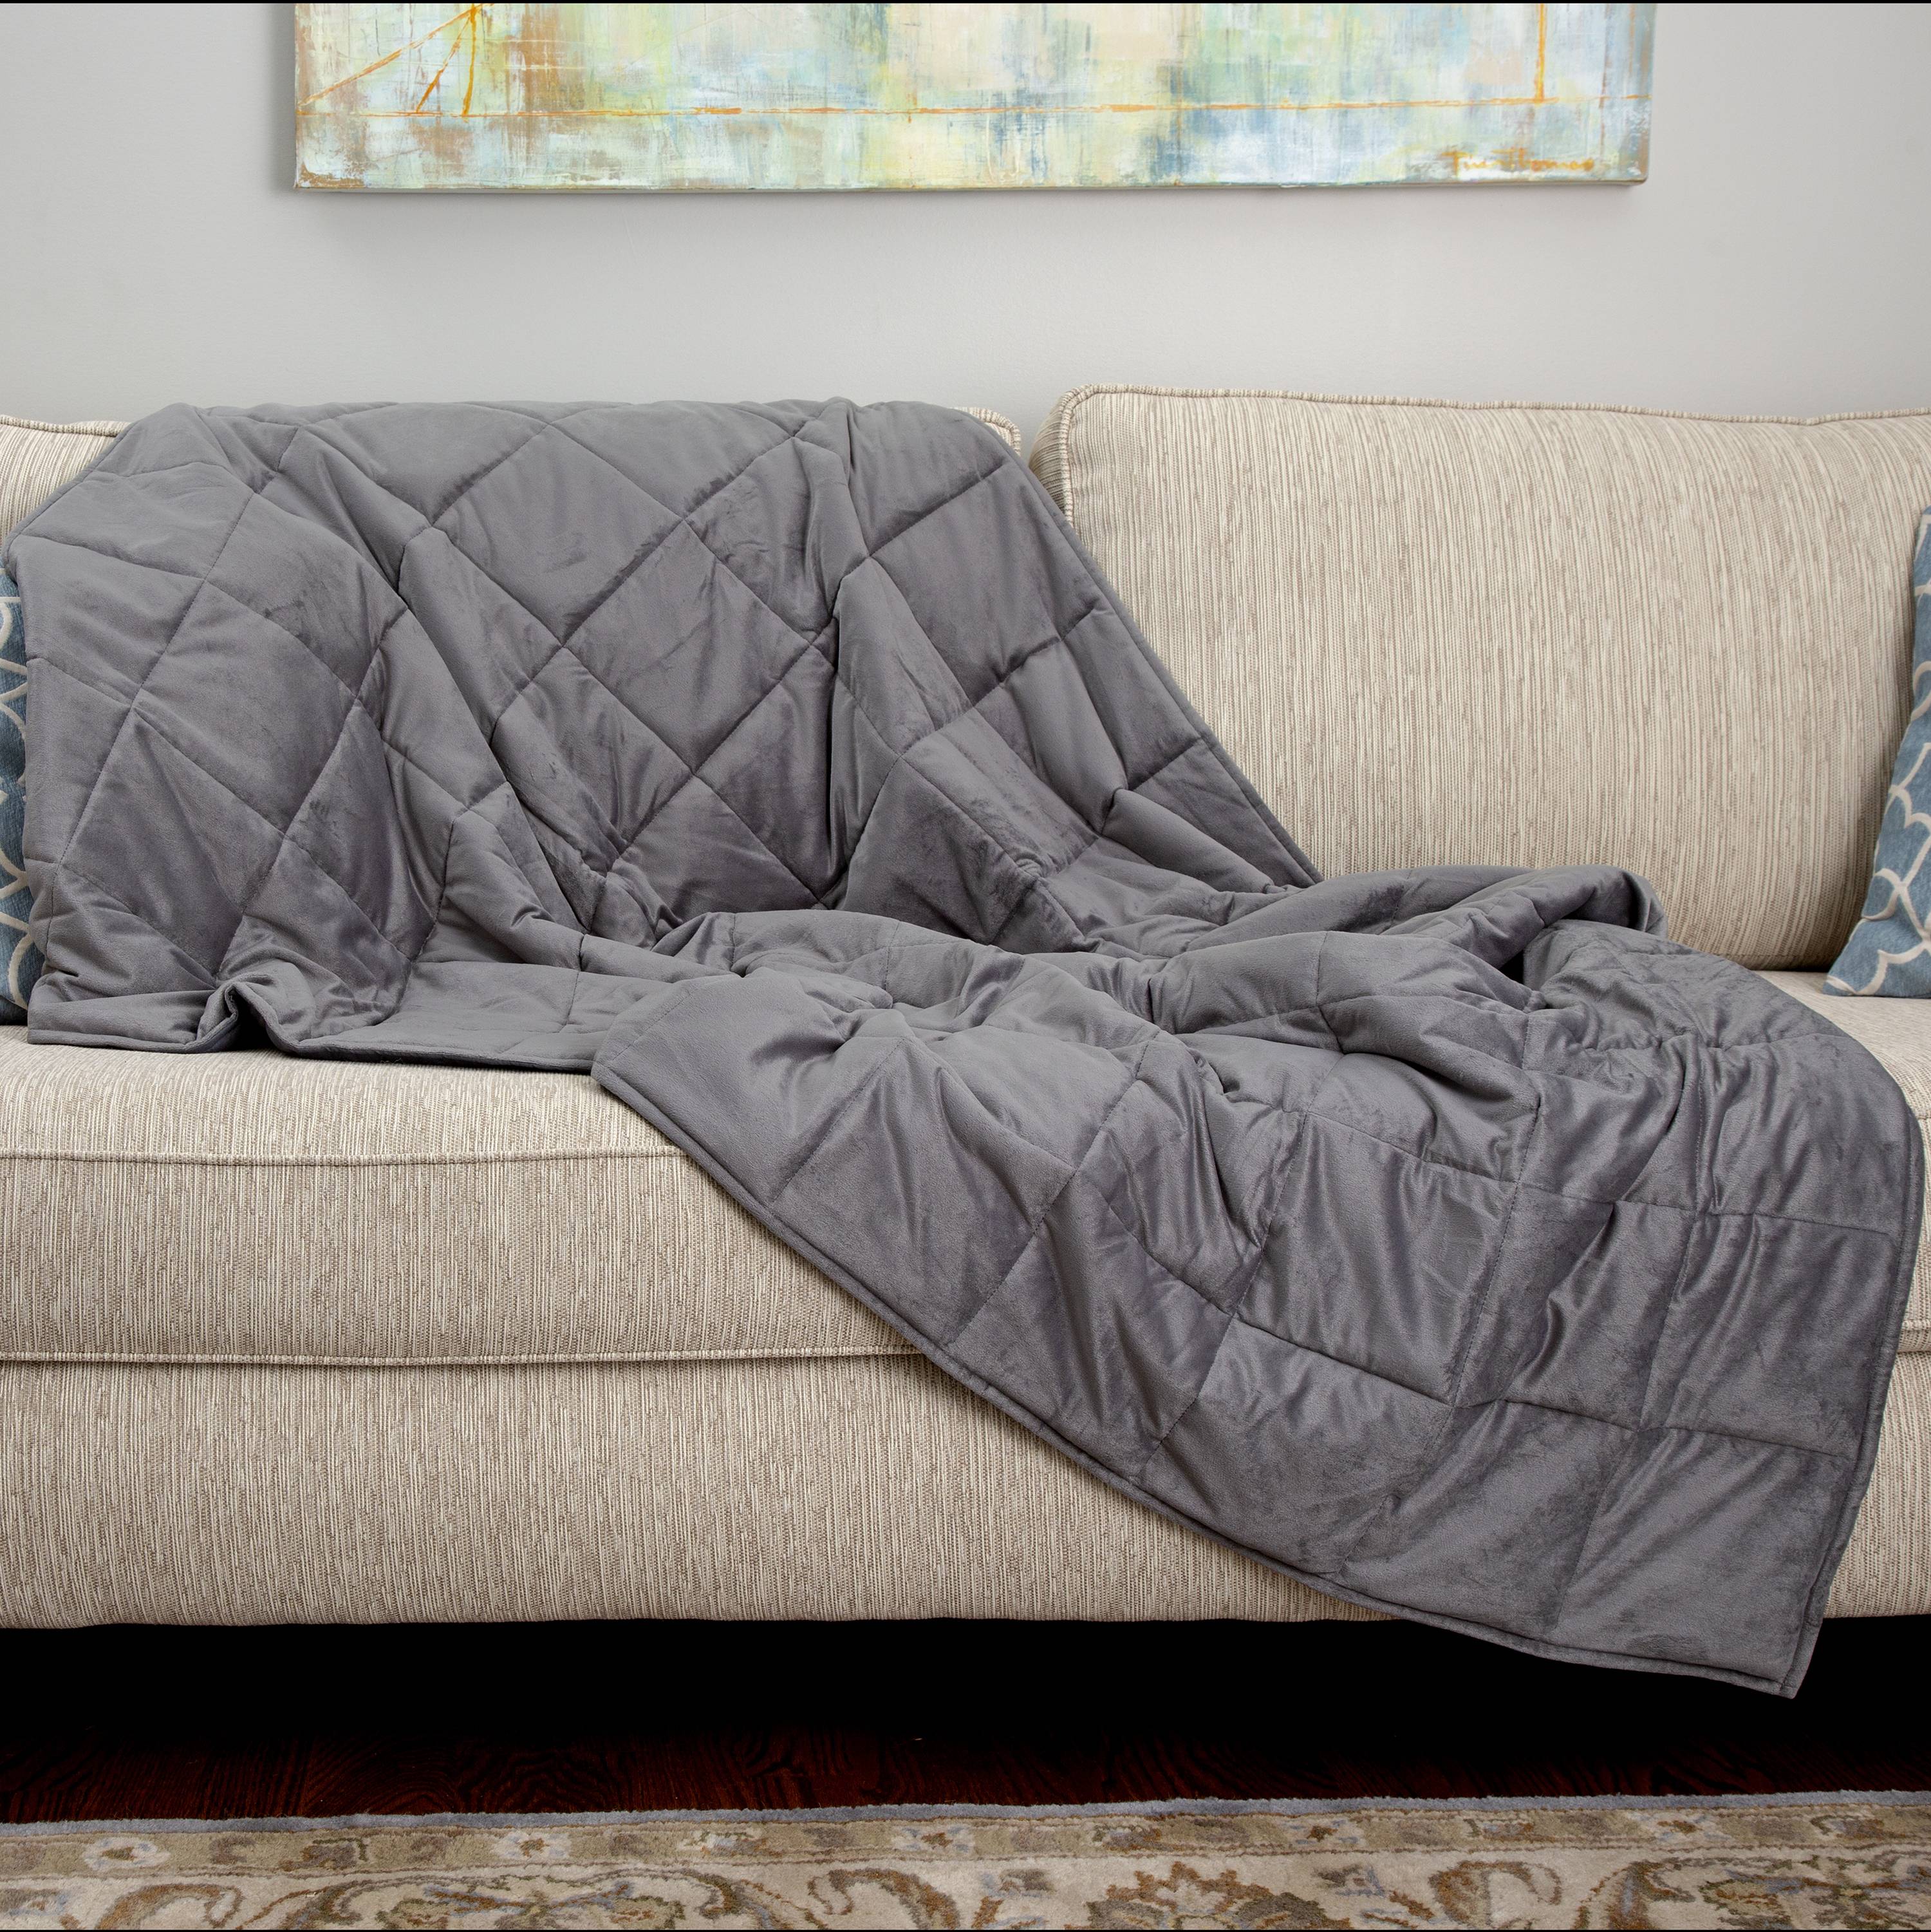 Our Tranquility Weighted Blanket Review - The Sleep Judge